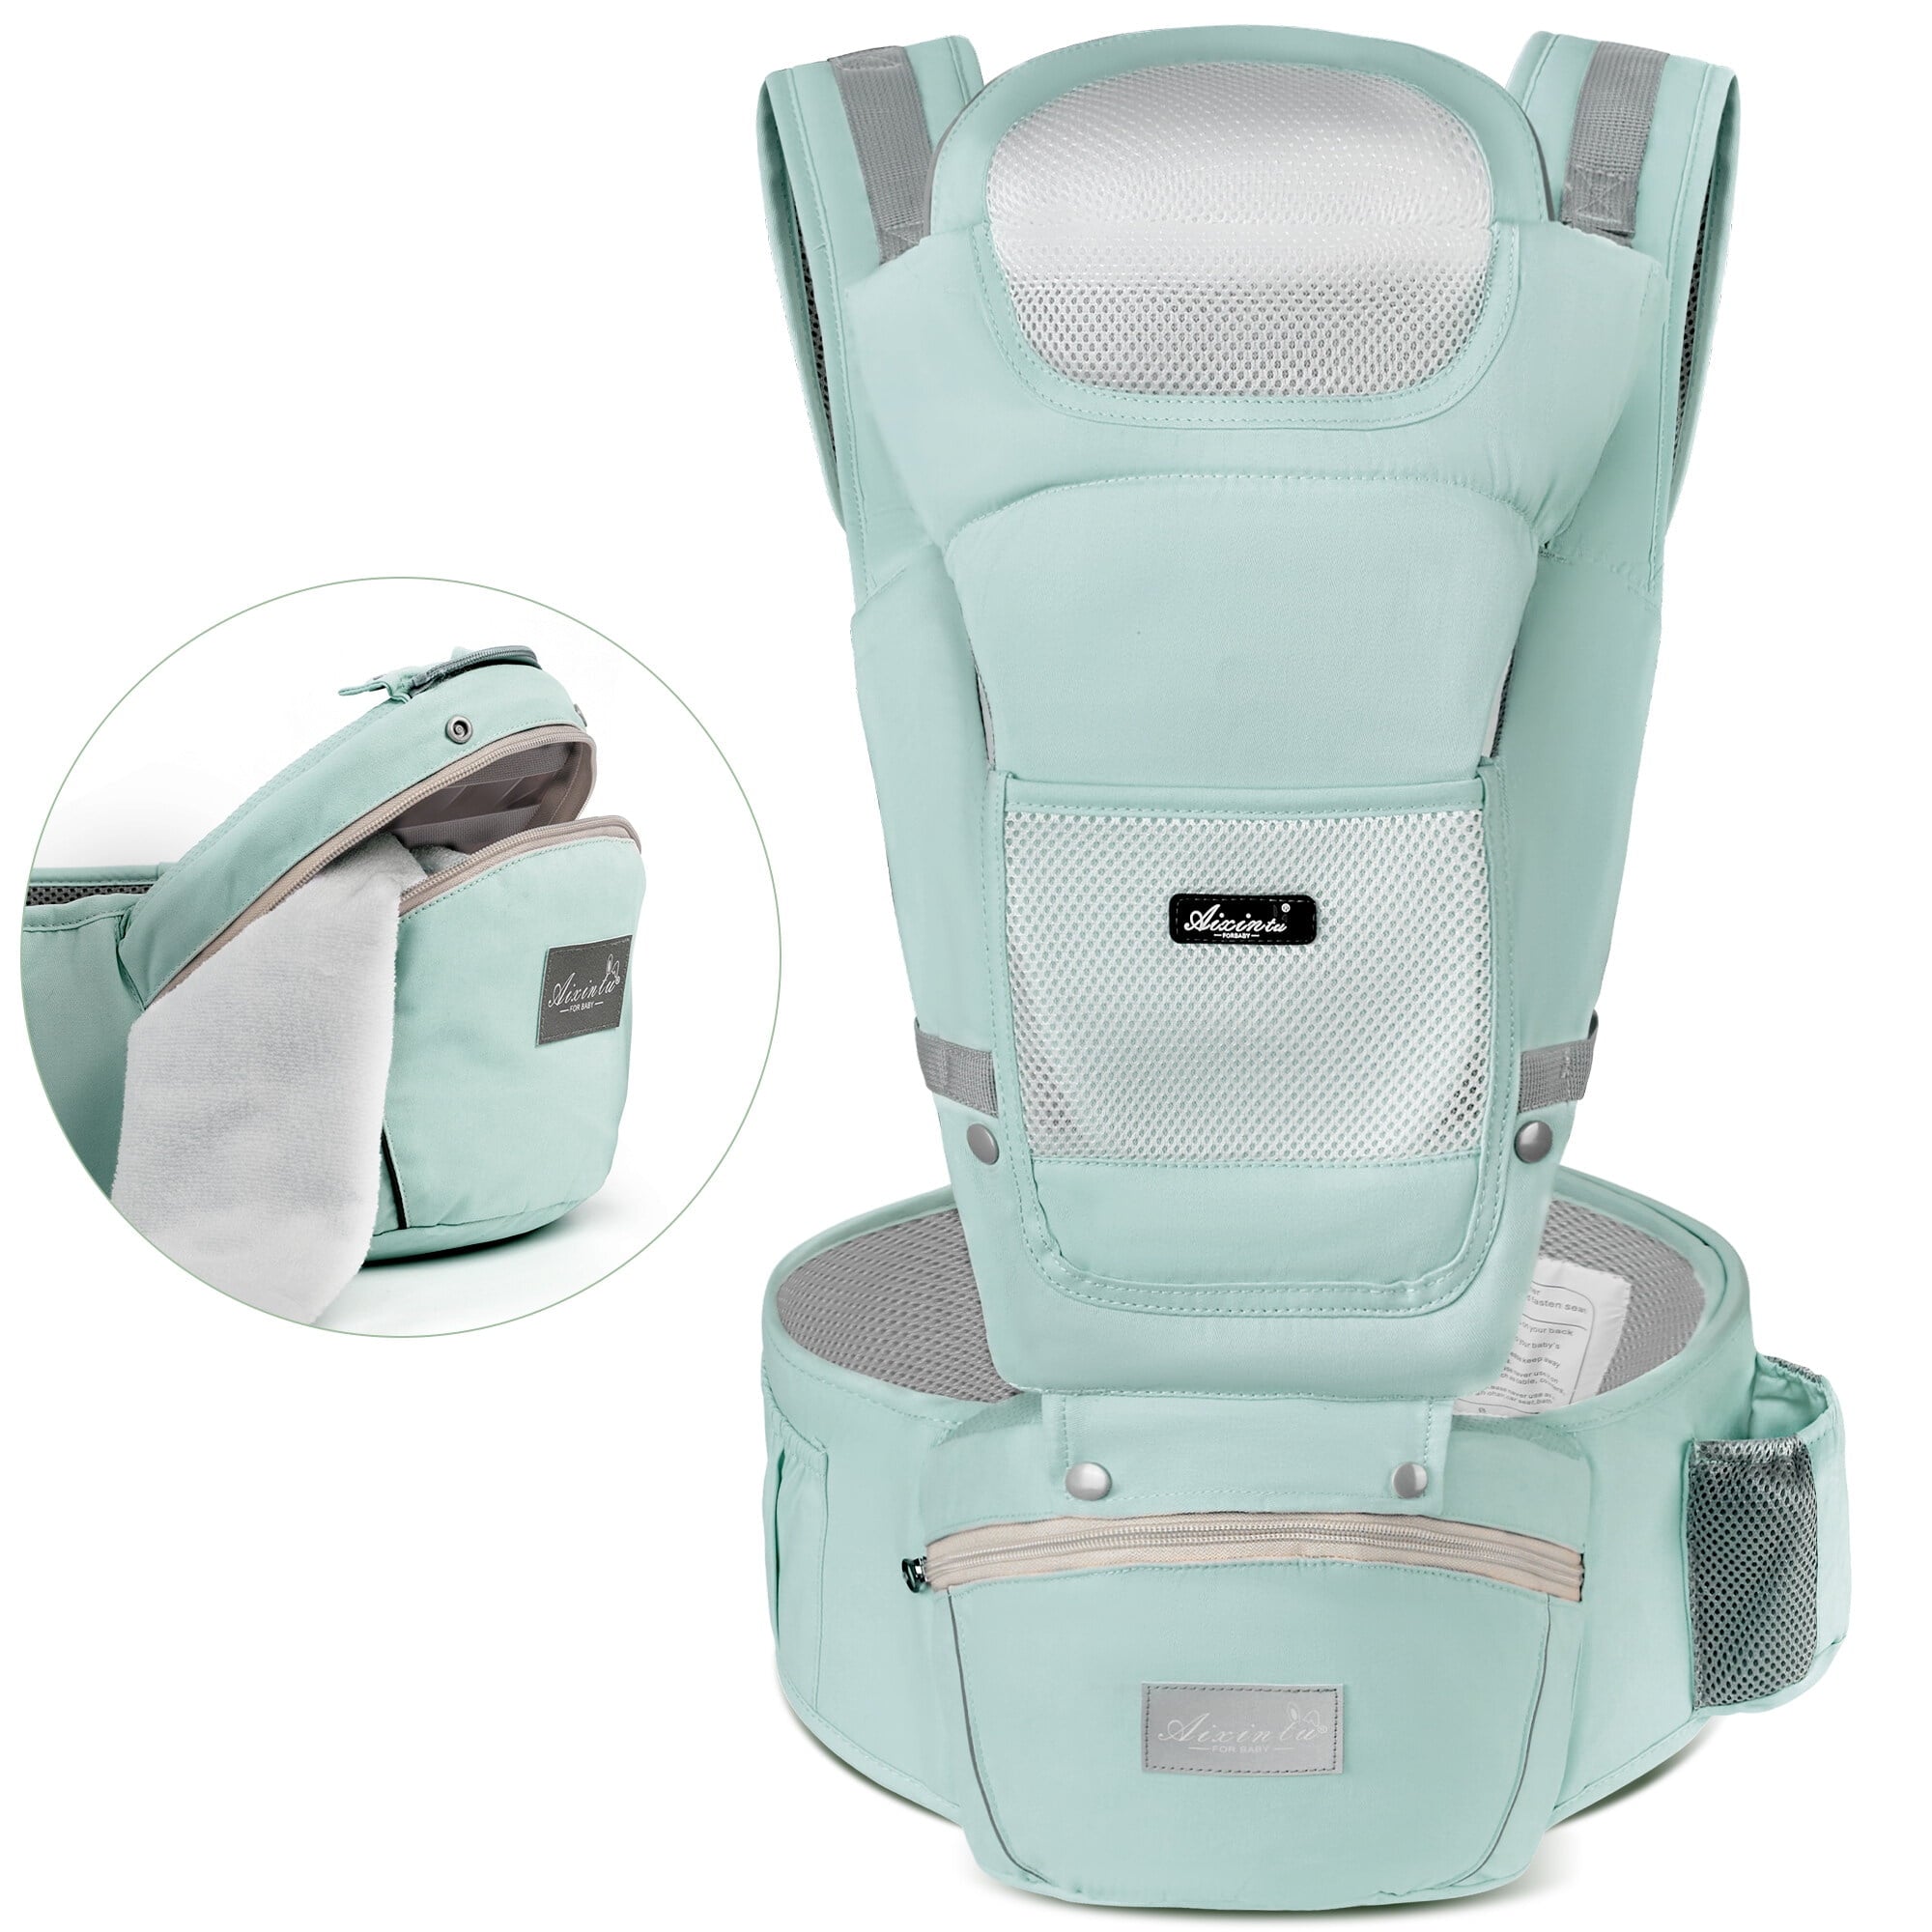 Vbiger 6-in-1 Convertible Baby Carrier Newborn to Toddler, Kangaroo Ergonomic Baby Carrier with Hip Seat Lumbar Support, 8-50 lbs, Green